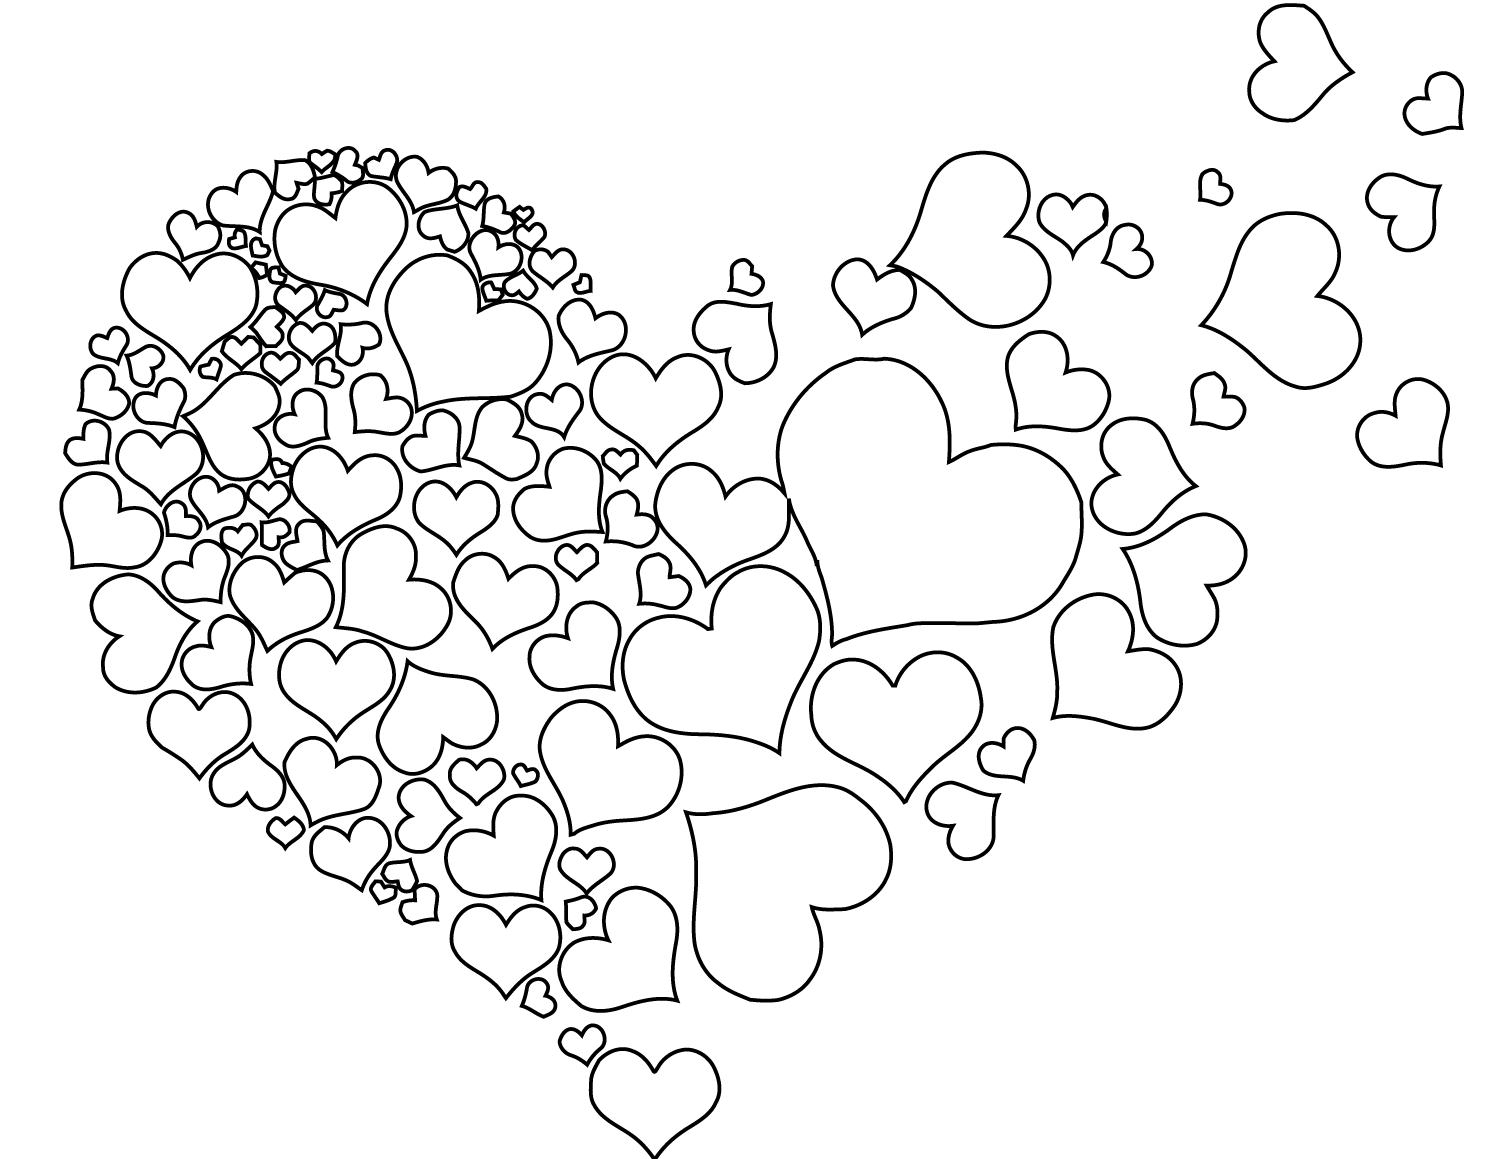 Torn Heart Coloring Page